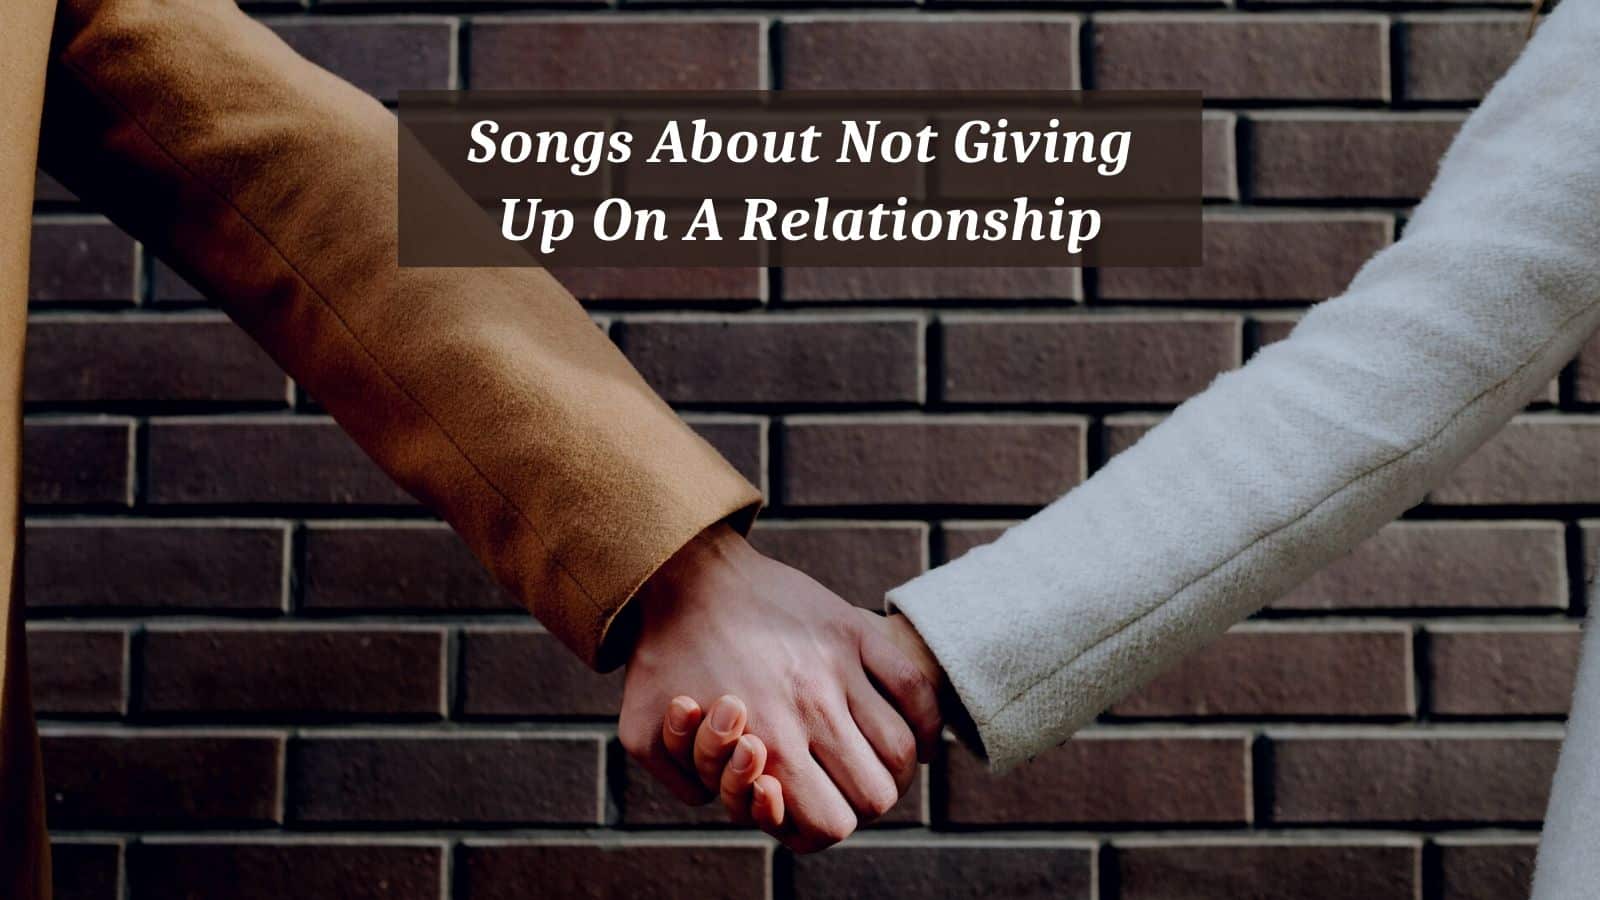 Songs About Not Giving Up On A Relationship